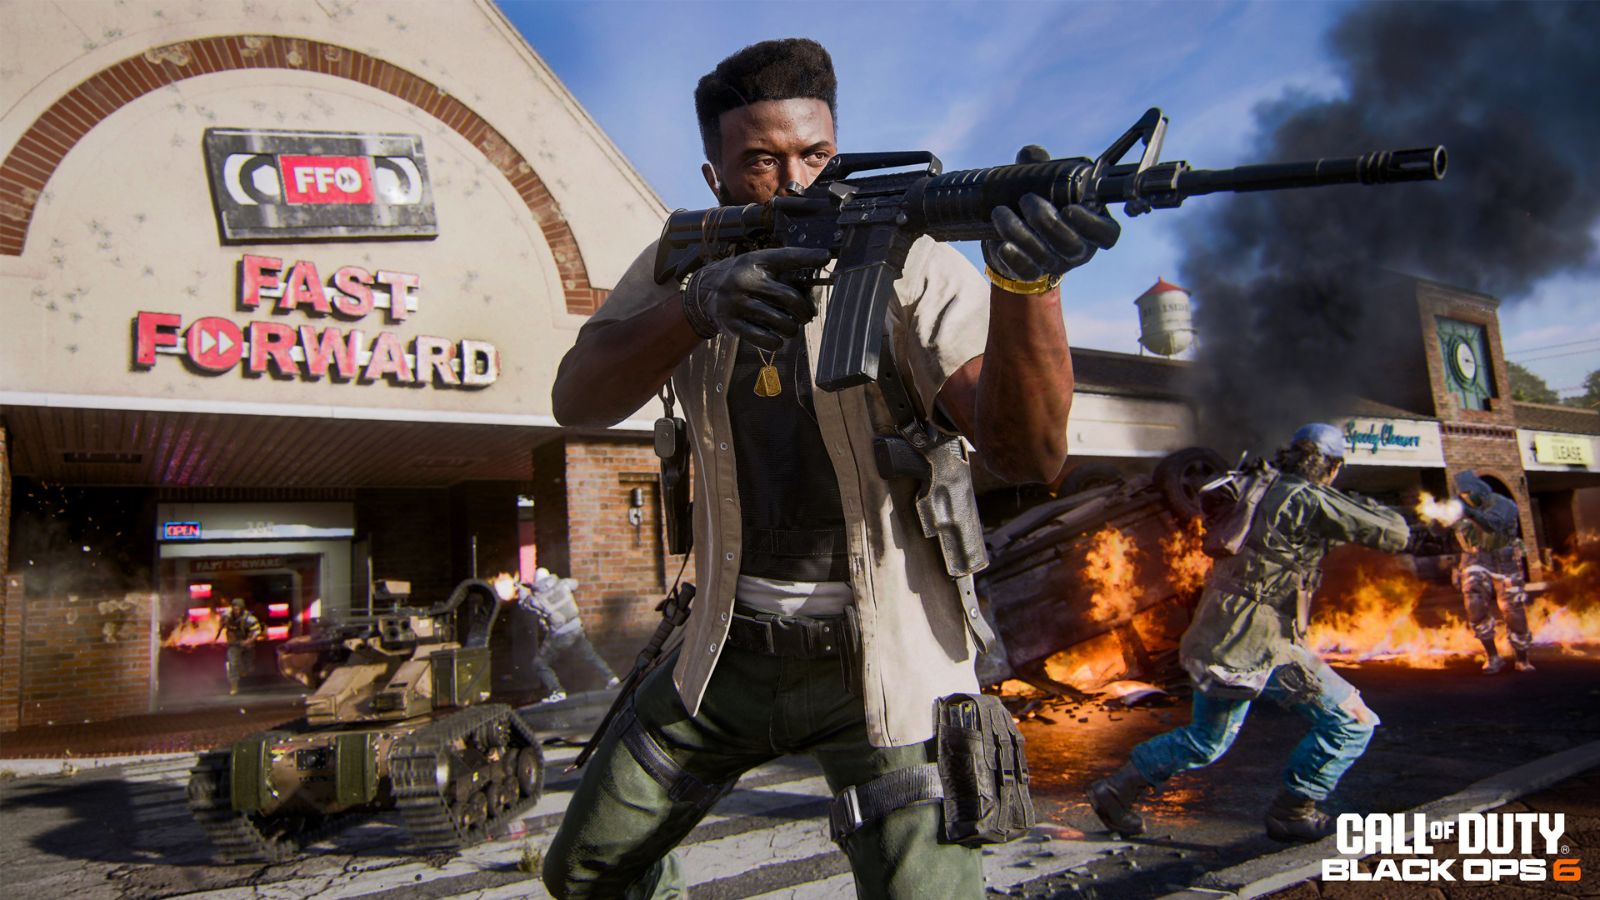 Troy Marshall aiming at his target in Call of Duty Black Ops 6 key visual